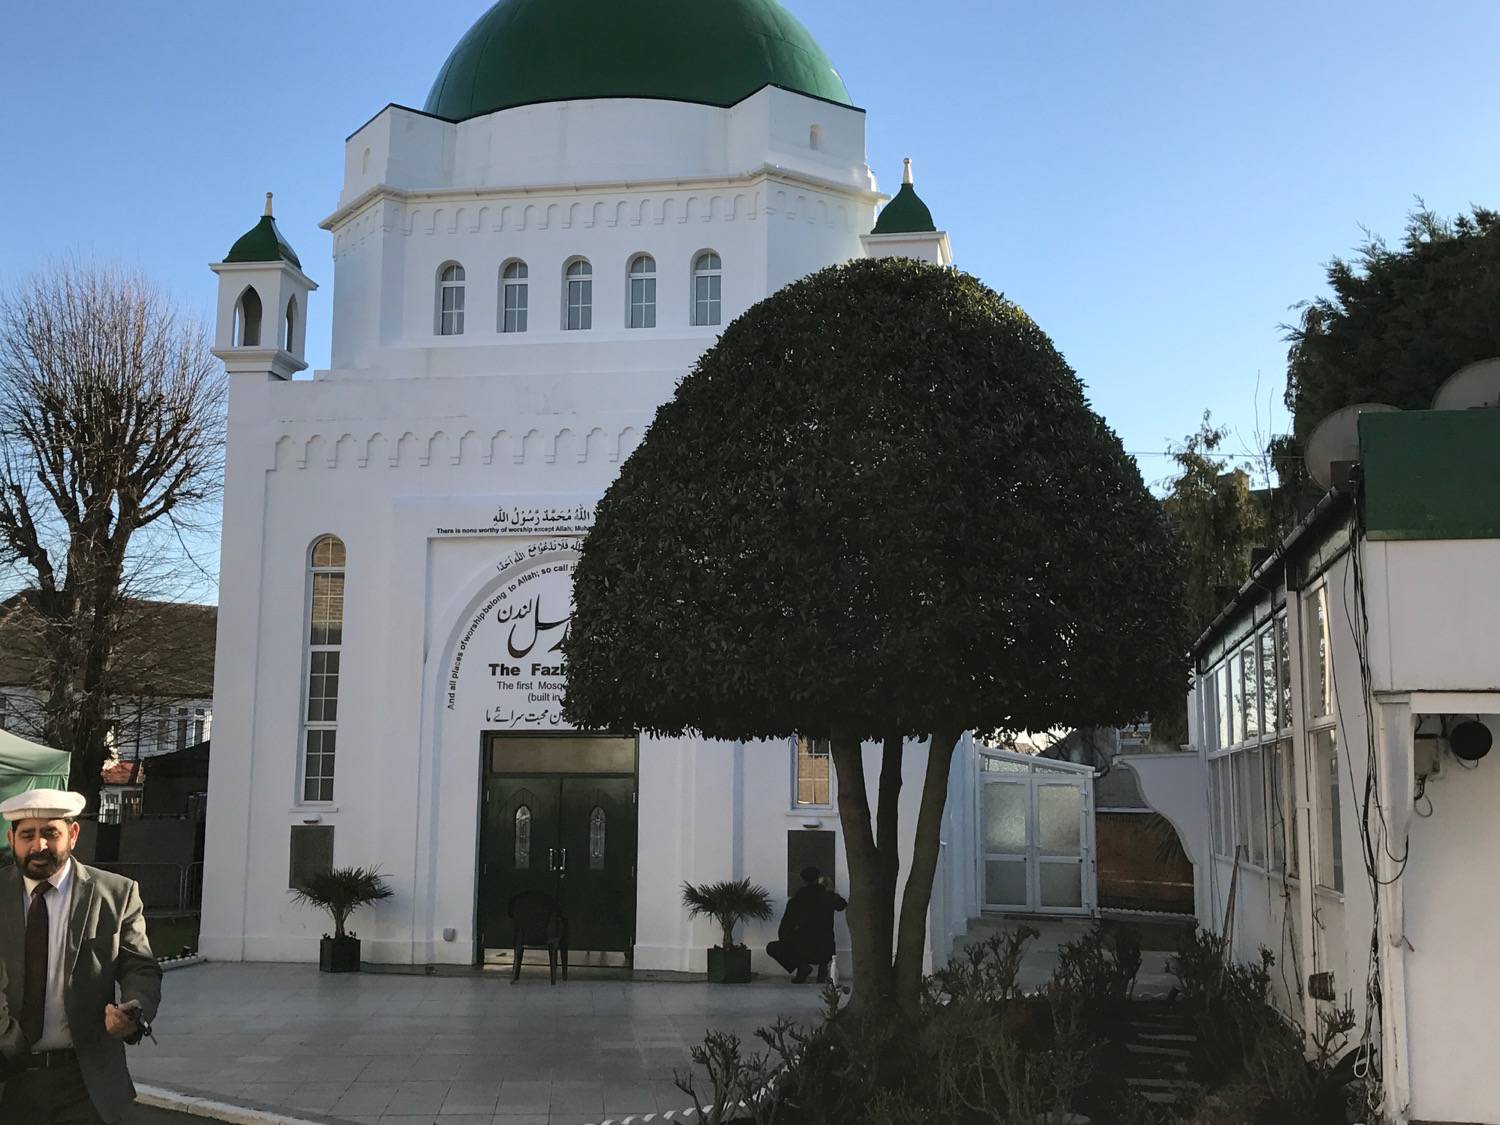 Fazl Mosque - View of the main entrance past ornamental trees